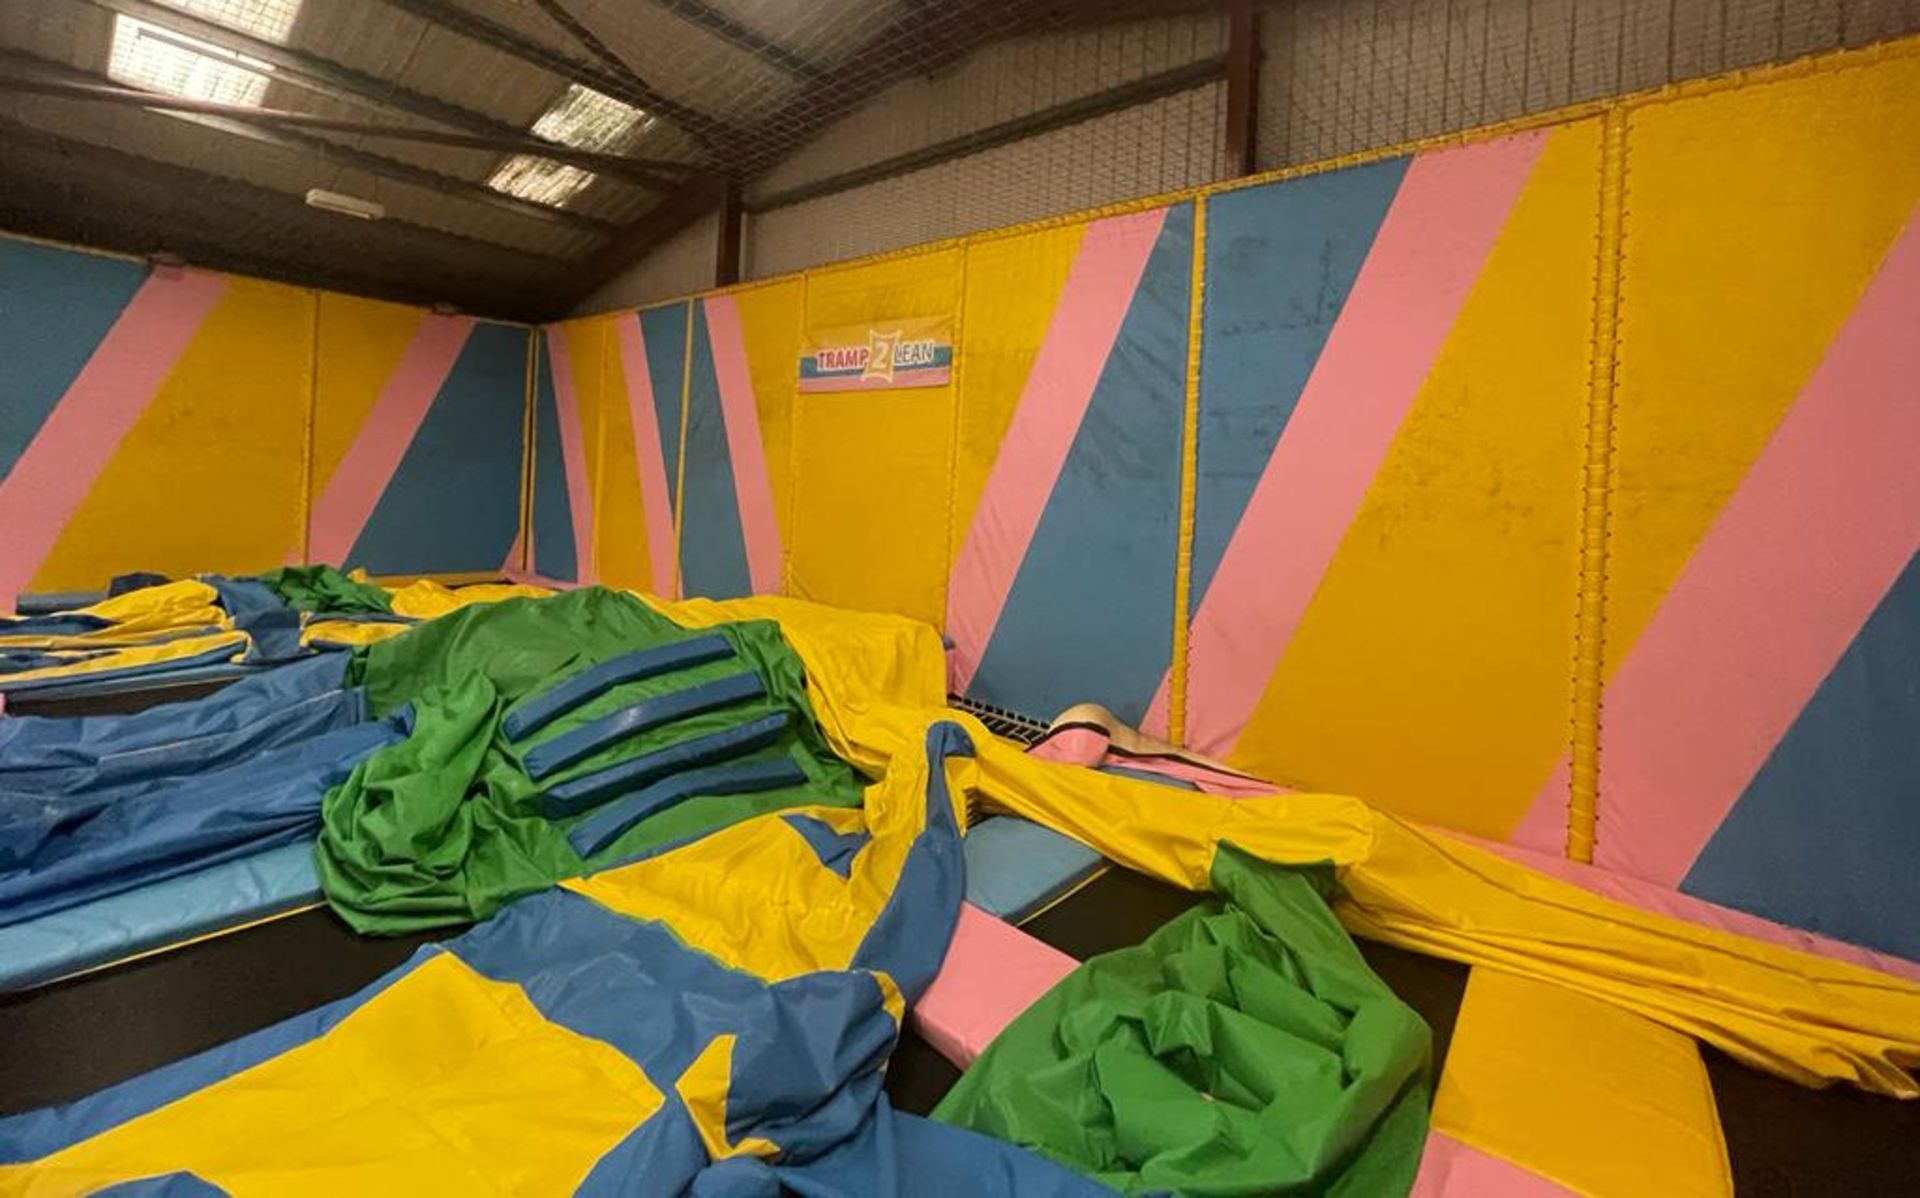 1 x Trampoline Park With Over 40 Interconnected Trampolines, Inflatable Activity Area, Waiting - Image 92 of 99